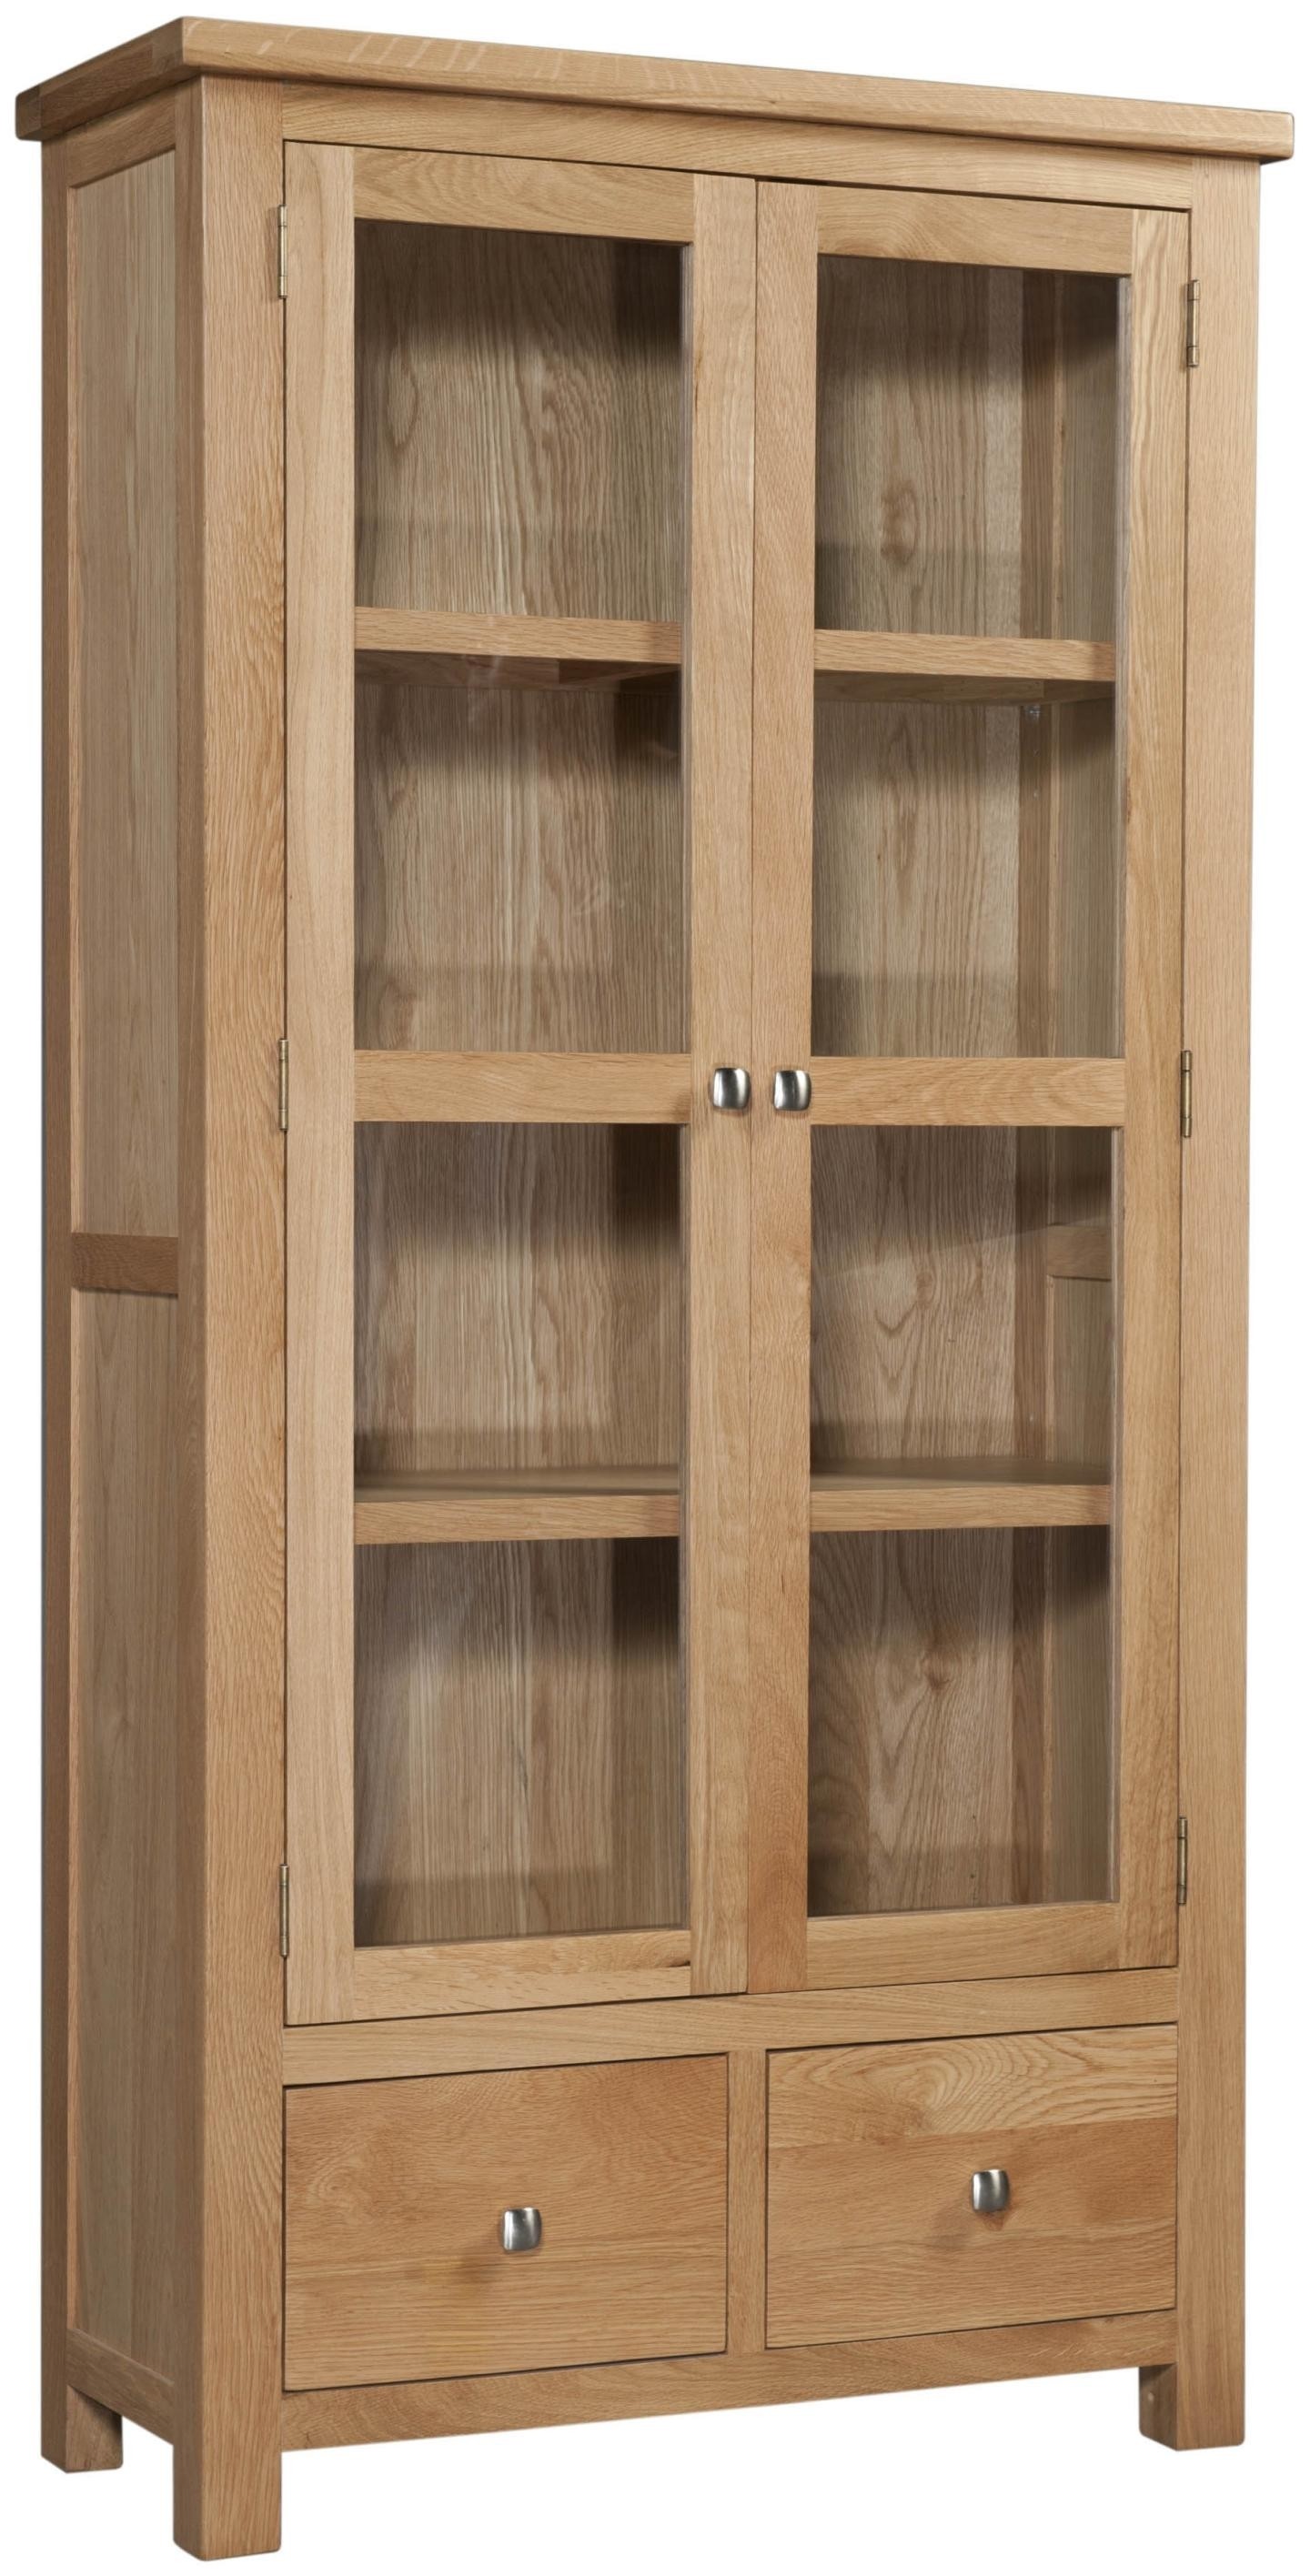 Abbey oak display cabinet with glass doors 1